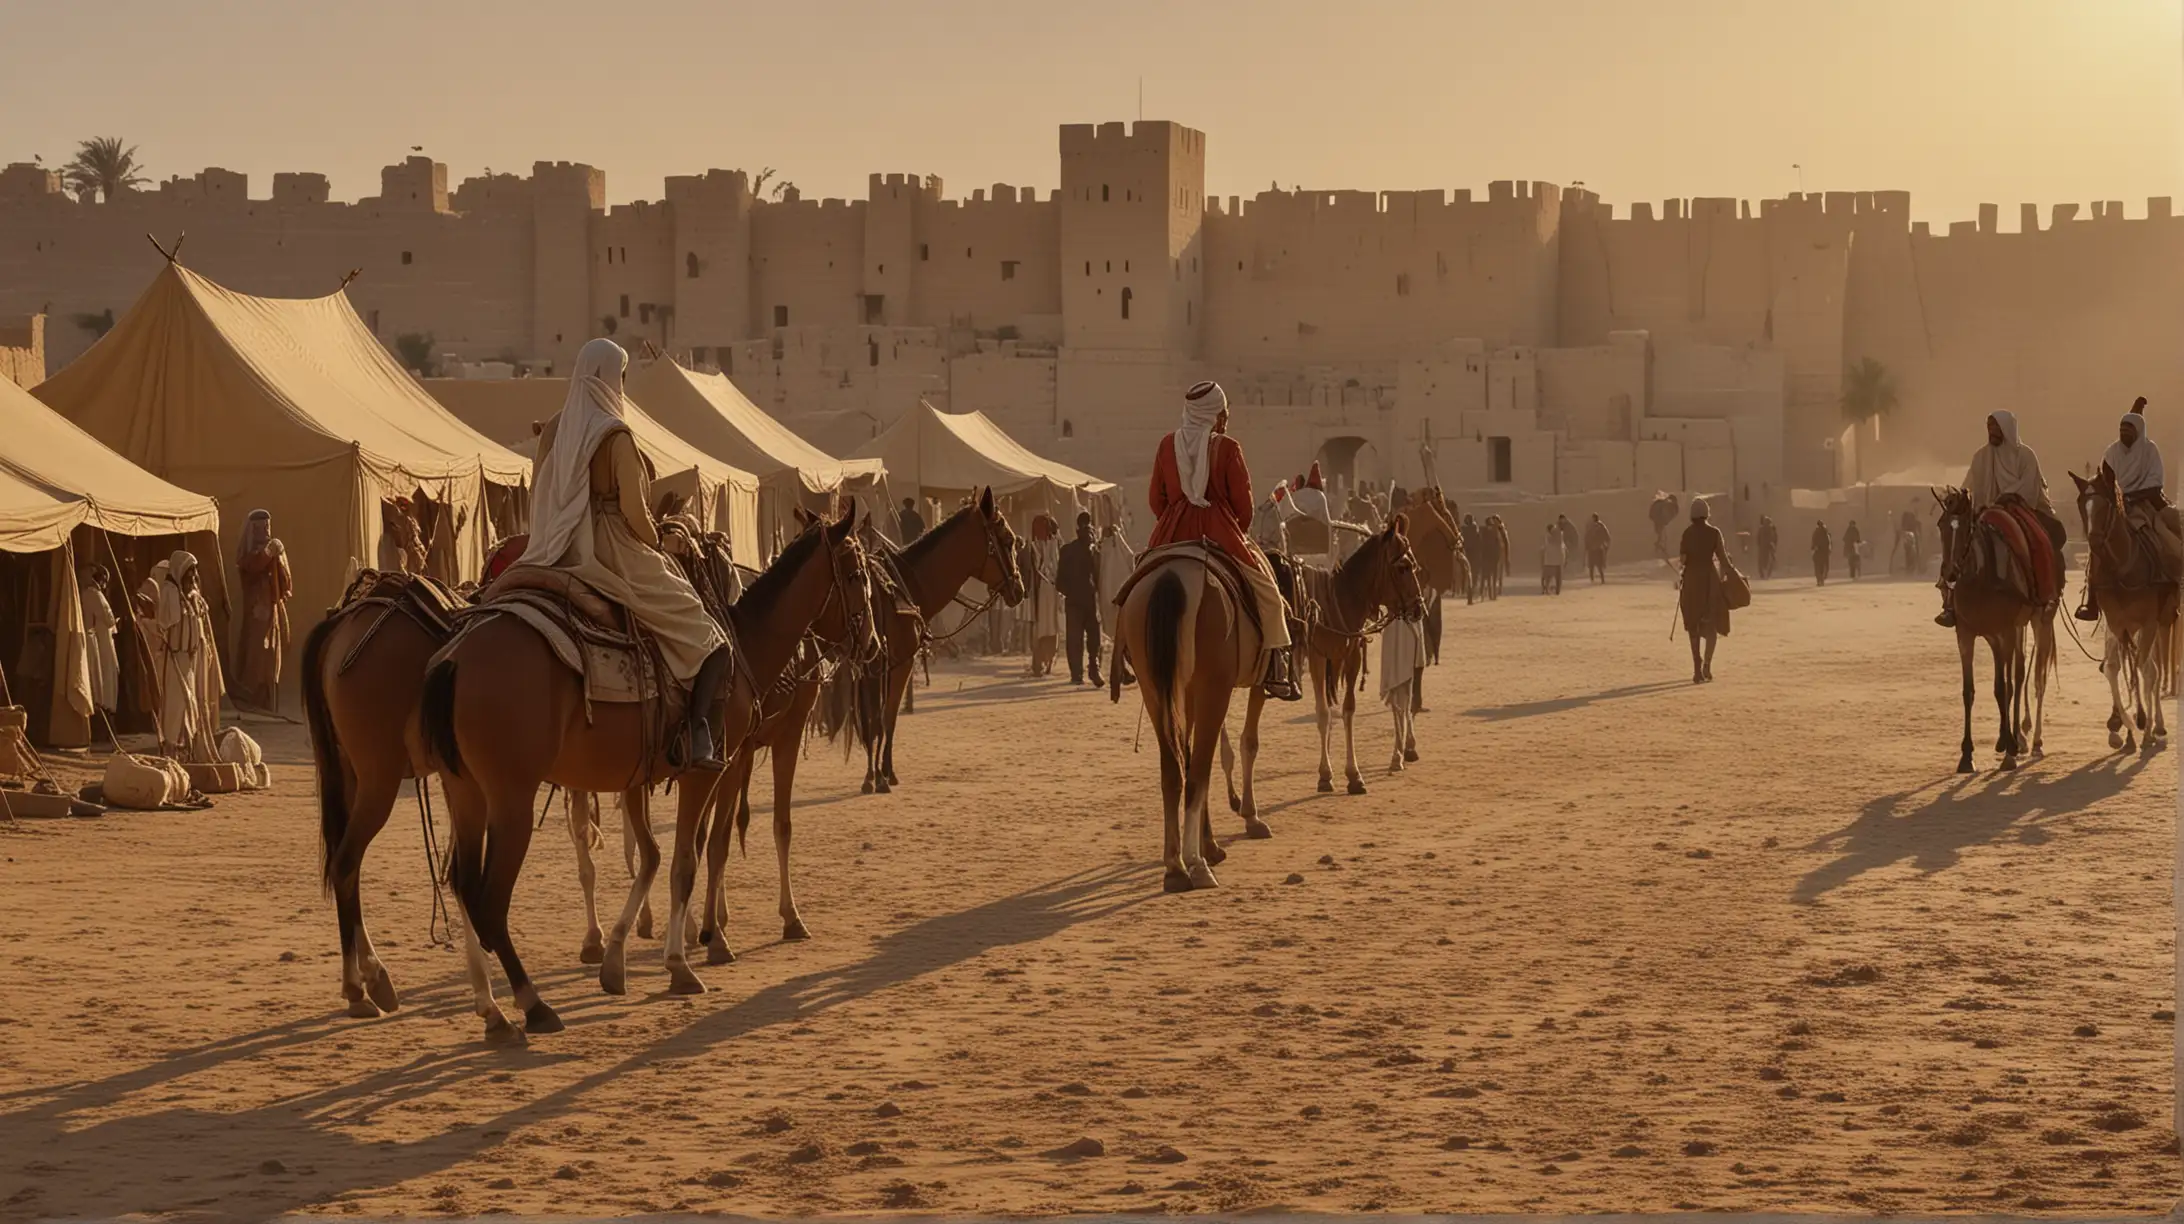 outside the city walls of Sheba, the Queen servants loading  tents and gifts on horses and donkeys, before their journey to meet king Salomon, four legs only camels and horses  richly adorned,, early dawn, soft light, close-up, very realistic and cinematic, Cecil B. de MIlle's Ten Commandment style 